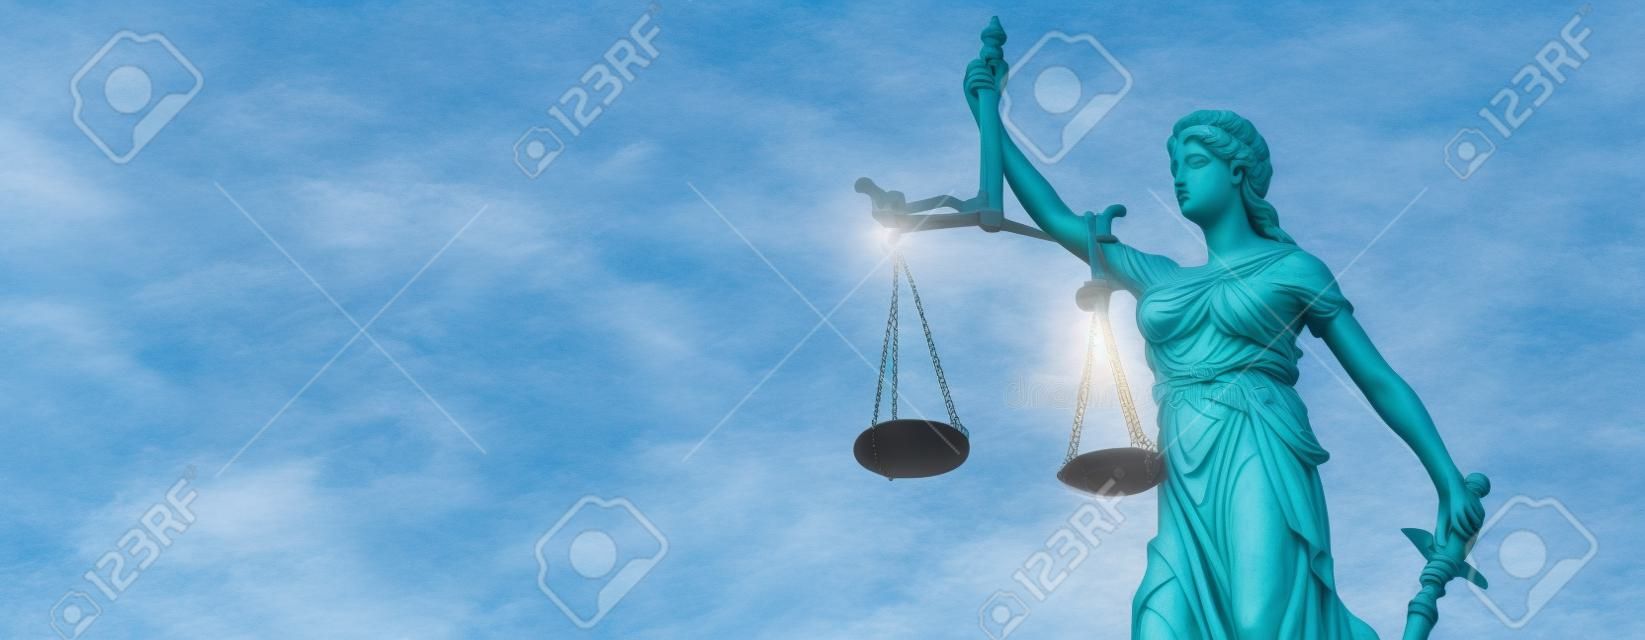 Lady justice. Statue of Justice on sky background. Legal and law concept